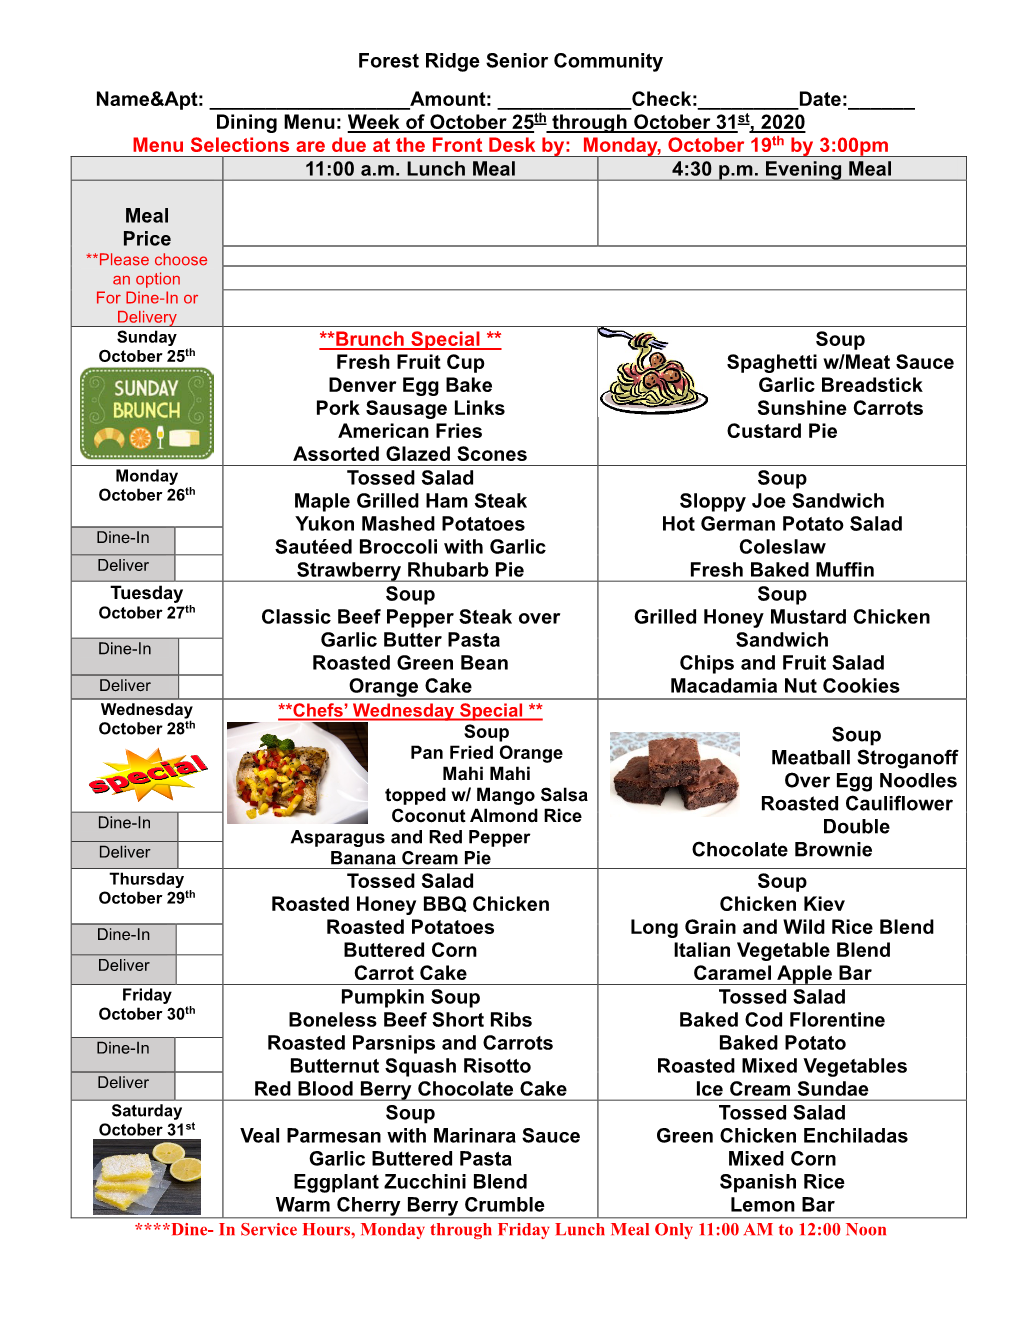 Week of October 25Th Through October 31St, 2020 Menu Selections Are Due at the Front Desk By: Monday, October 19Th by 3:00Pm 11:00 A.M